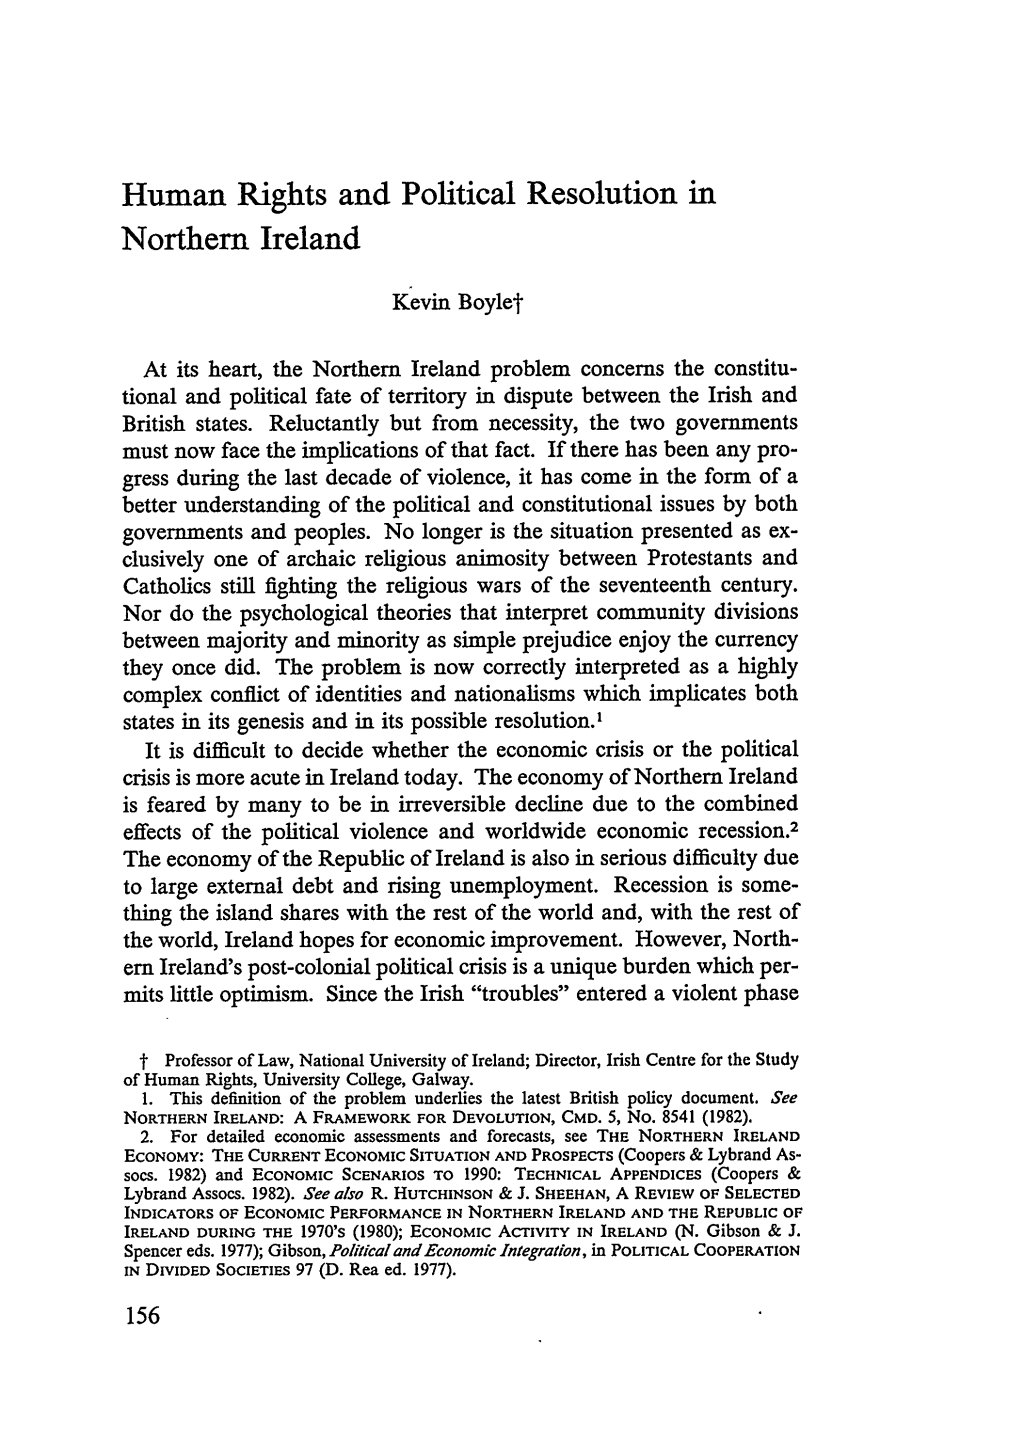 Human Rights and Political Resolution in Northern Ireland